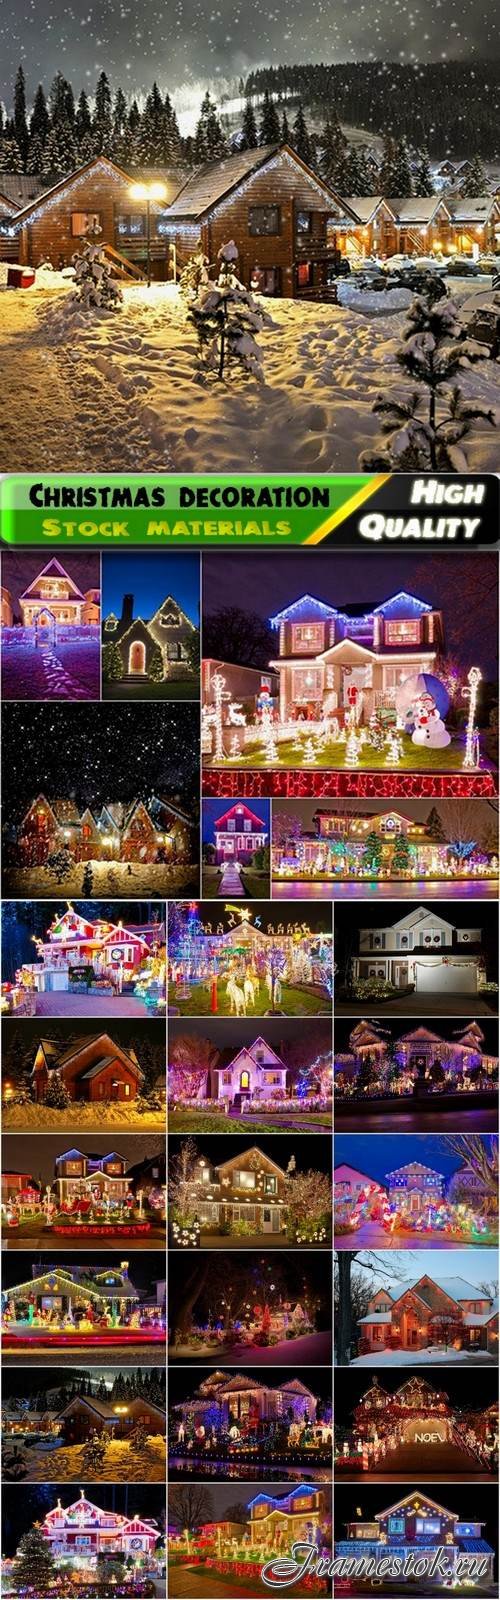 Home exteriors decorated Christmas lights - 25 HQ Jpg